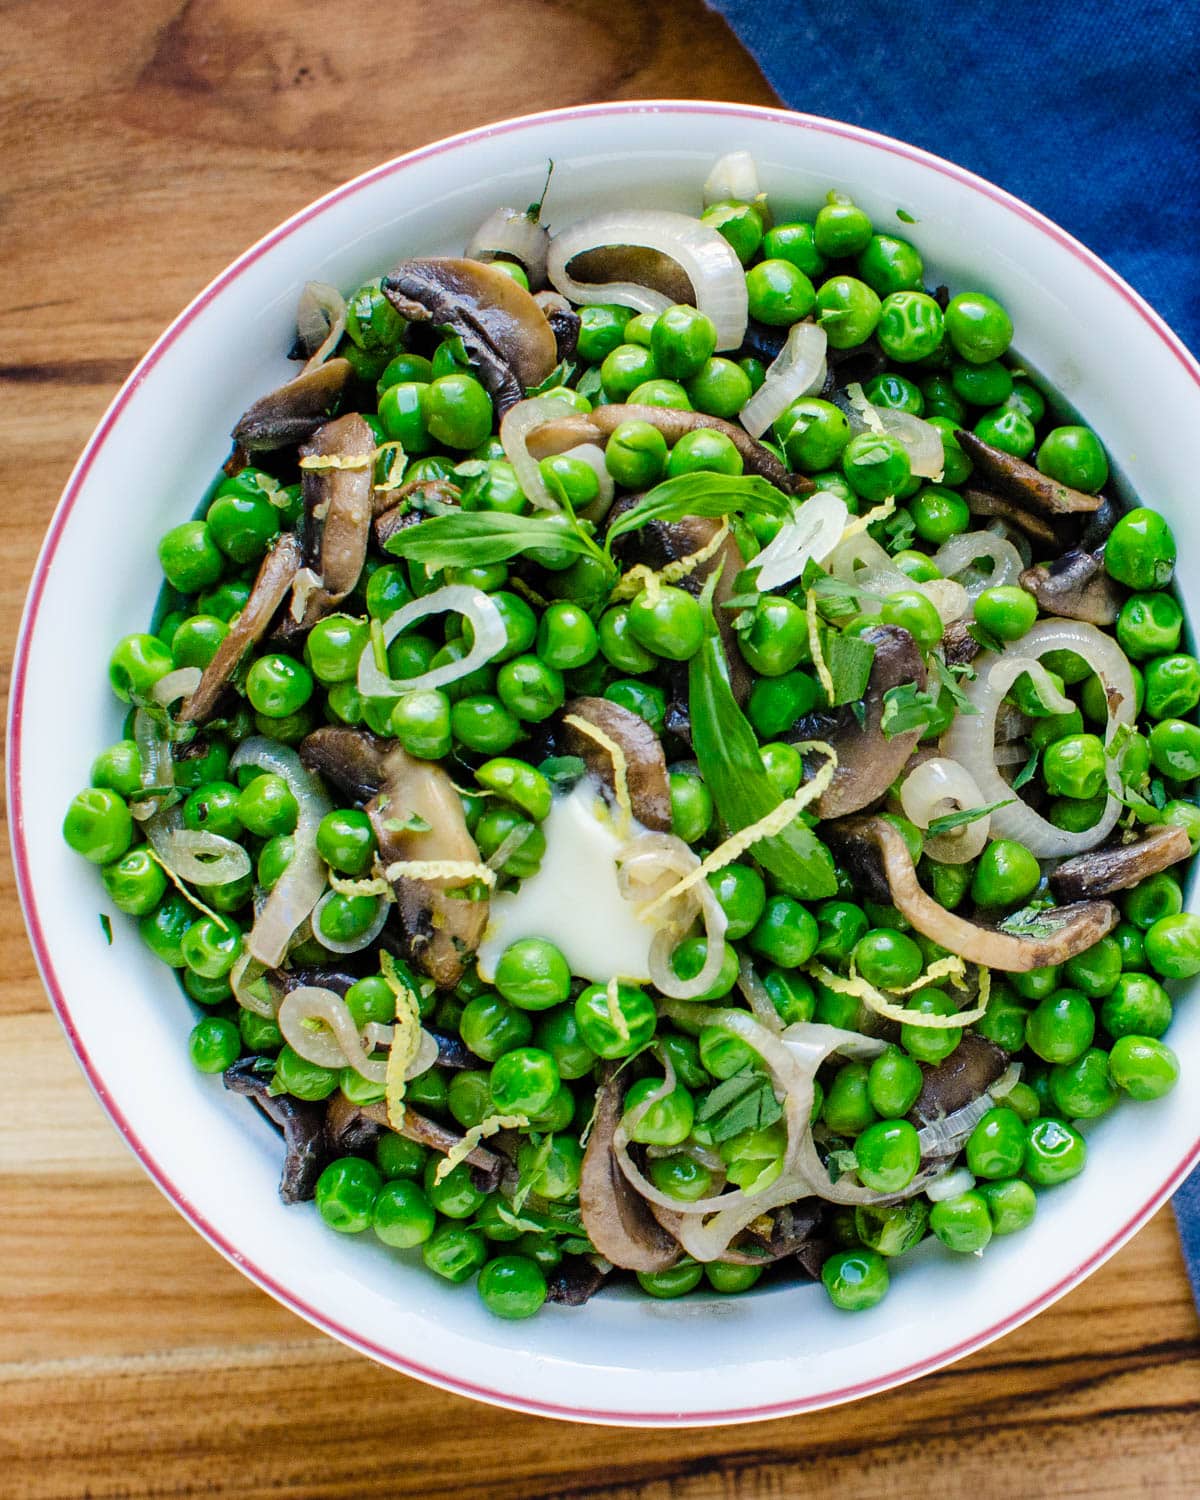 A peas side dish with shallots and mushrooms.